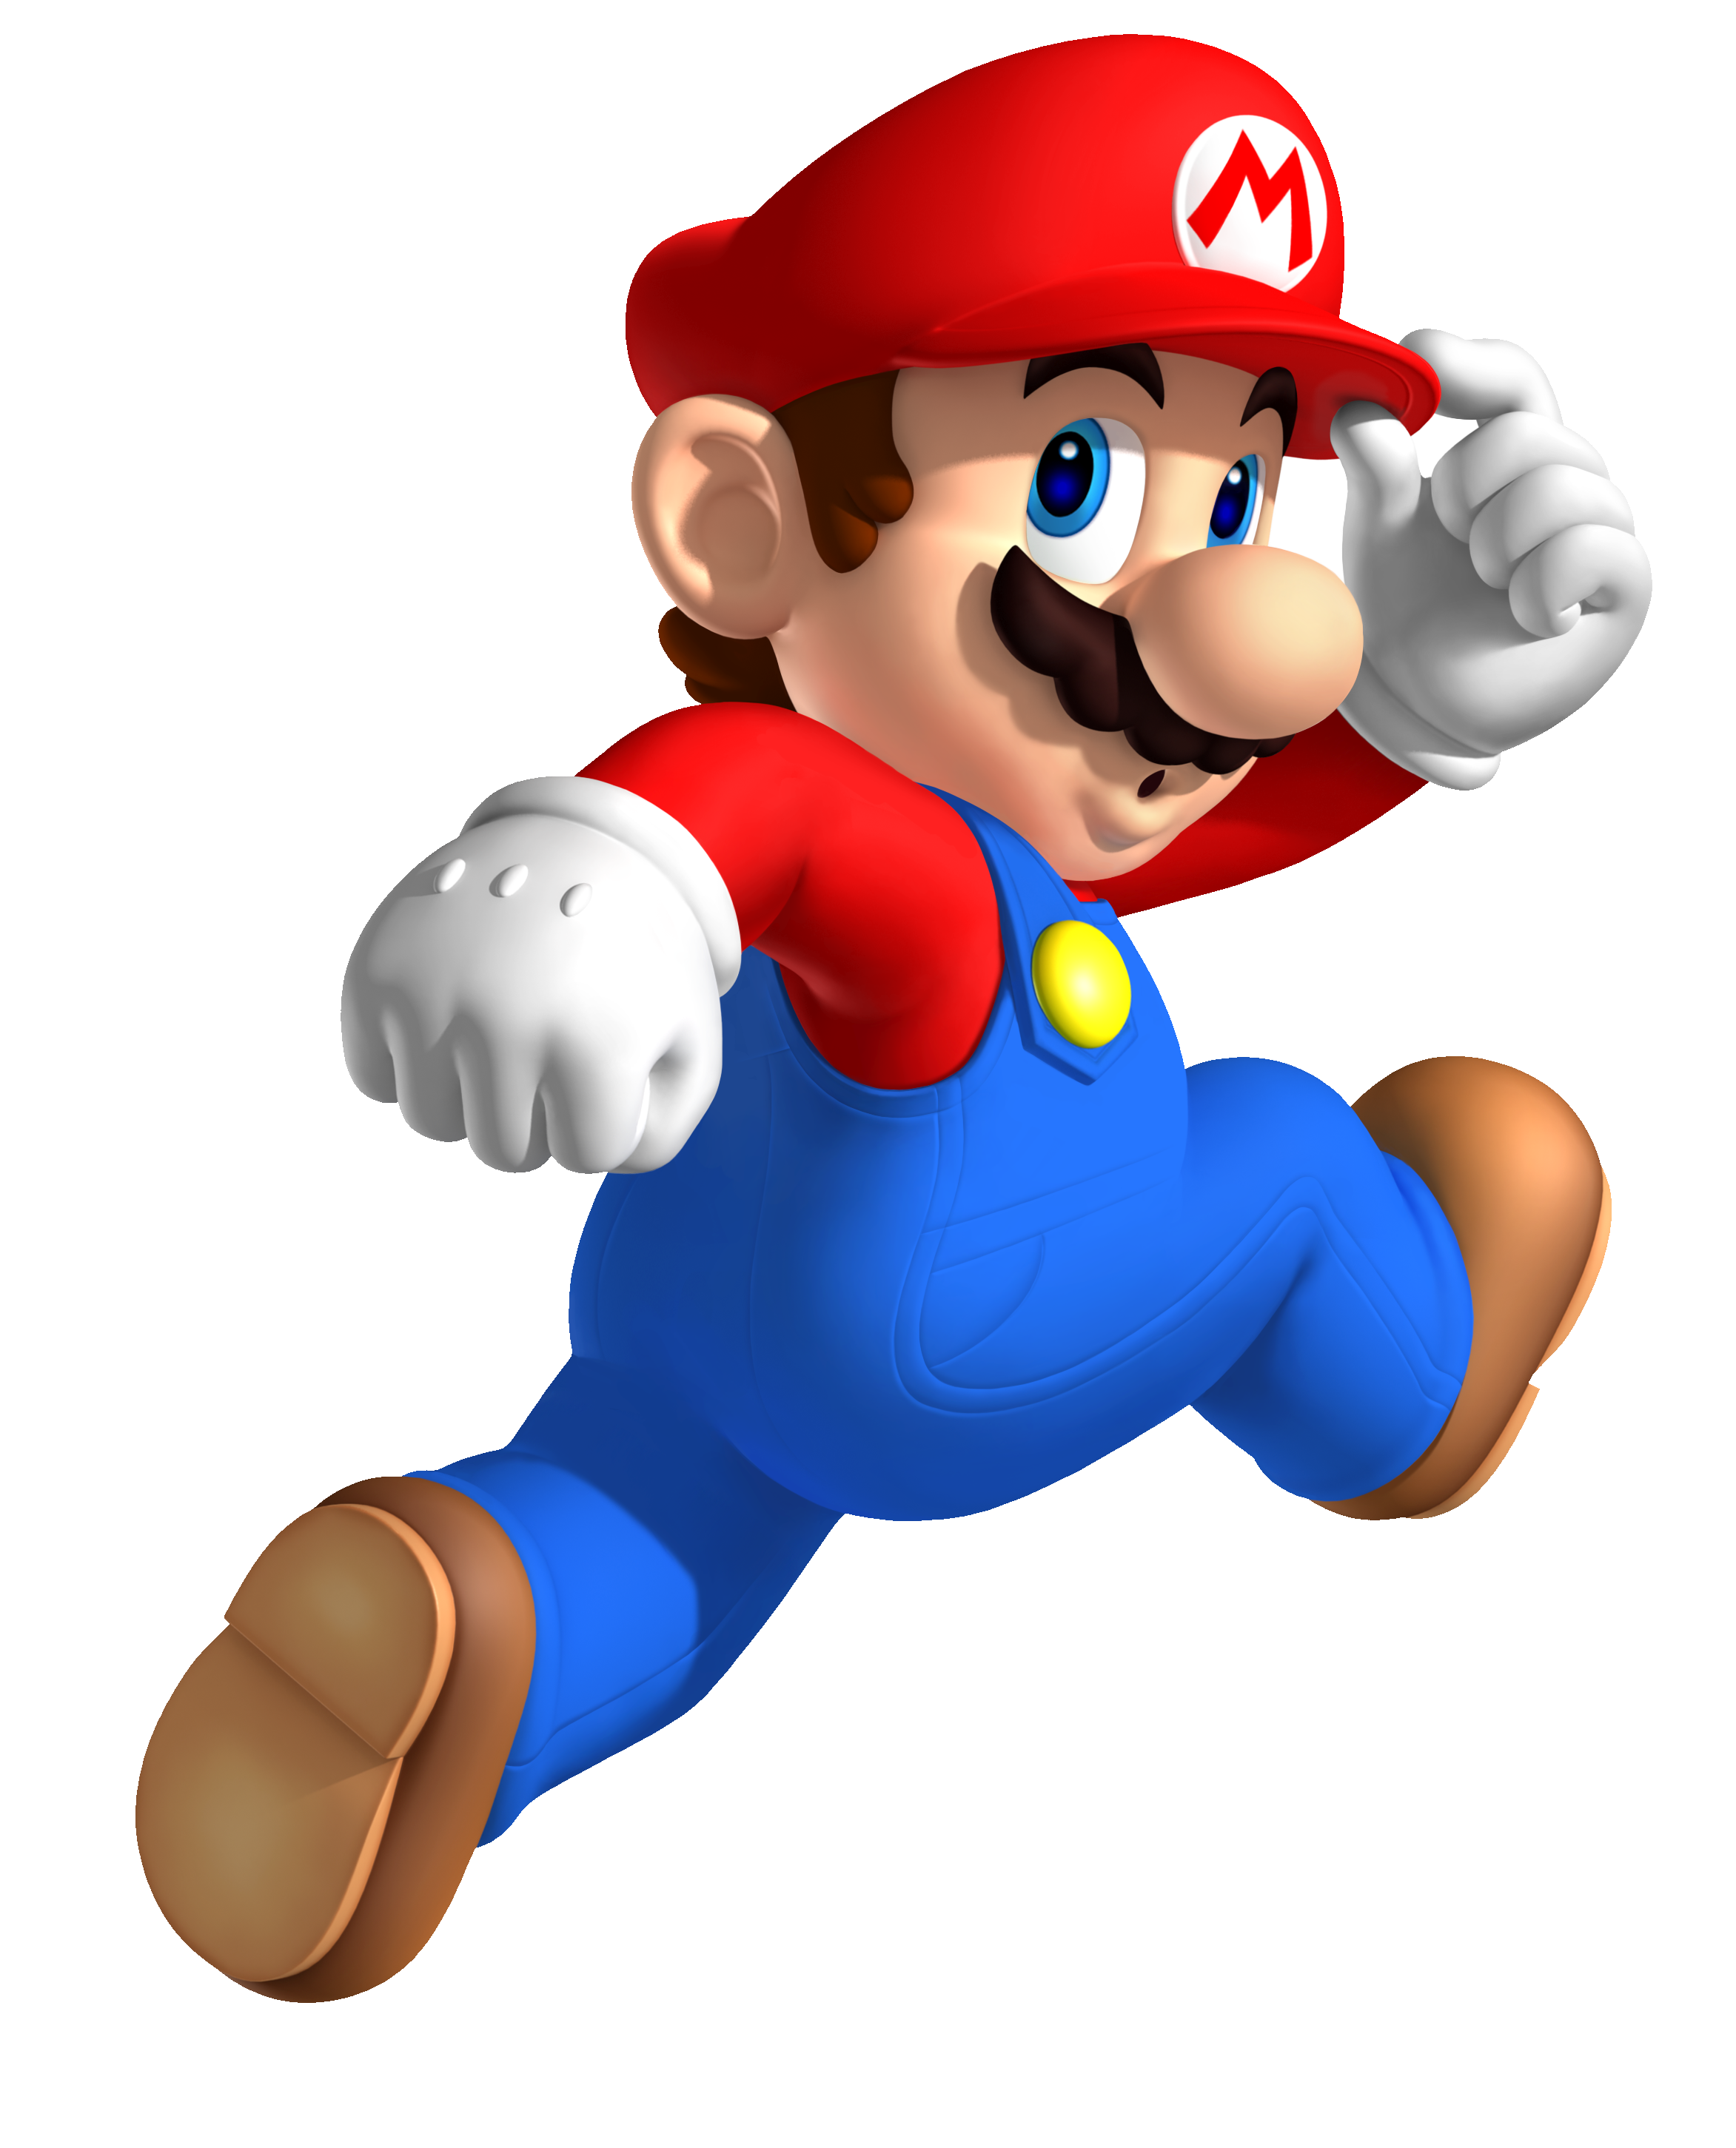 Mario characters at getdrawings. Video clipart transparent background